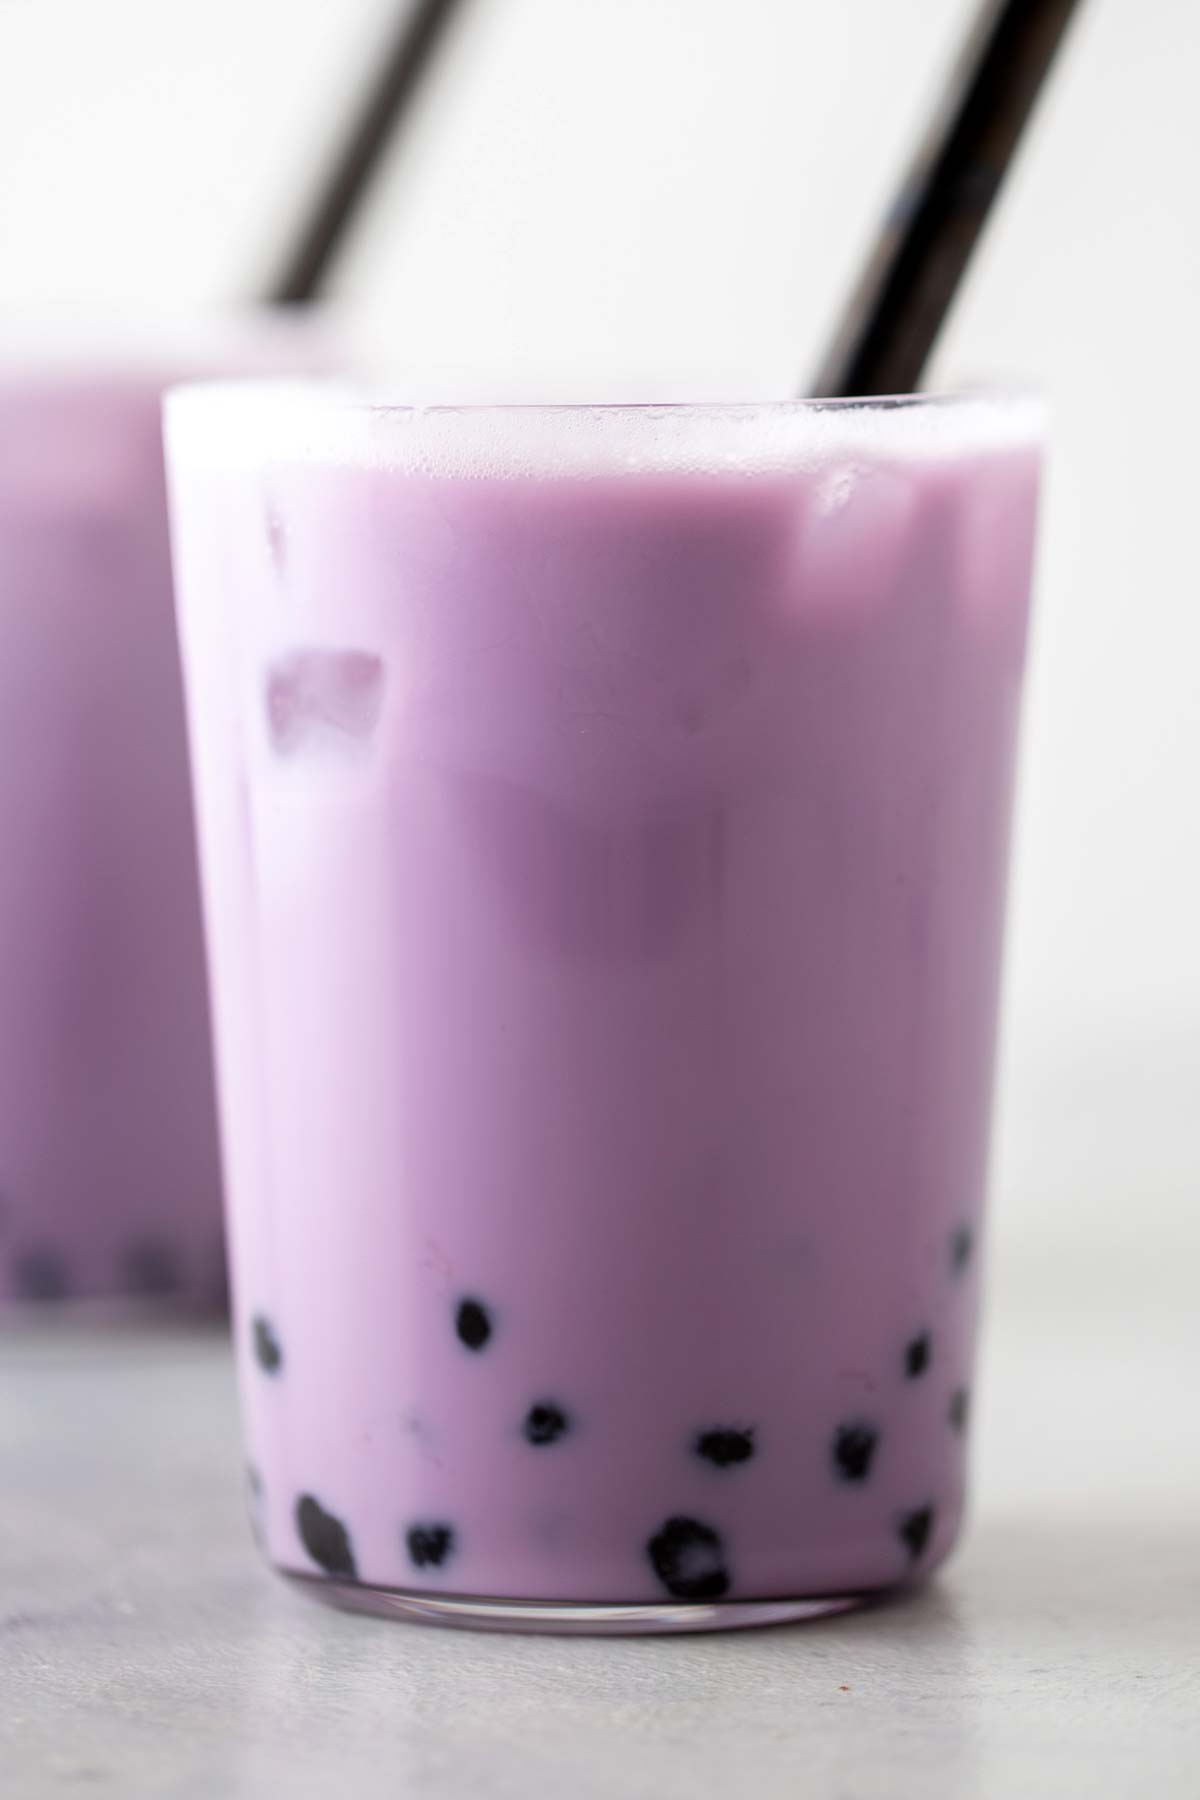 The finished, purple hued Easy Taro Milk Bubble Tea in a clear glass with a wide straw.